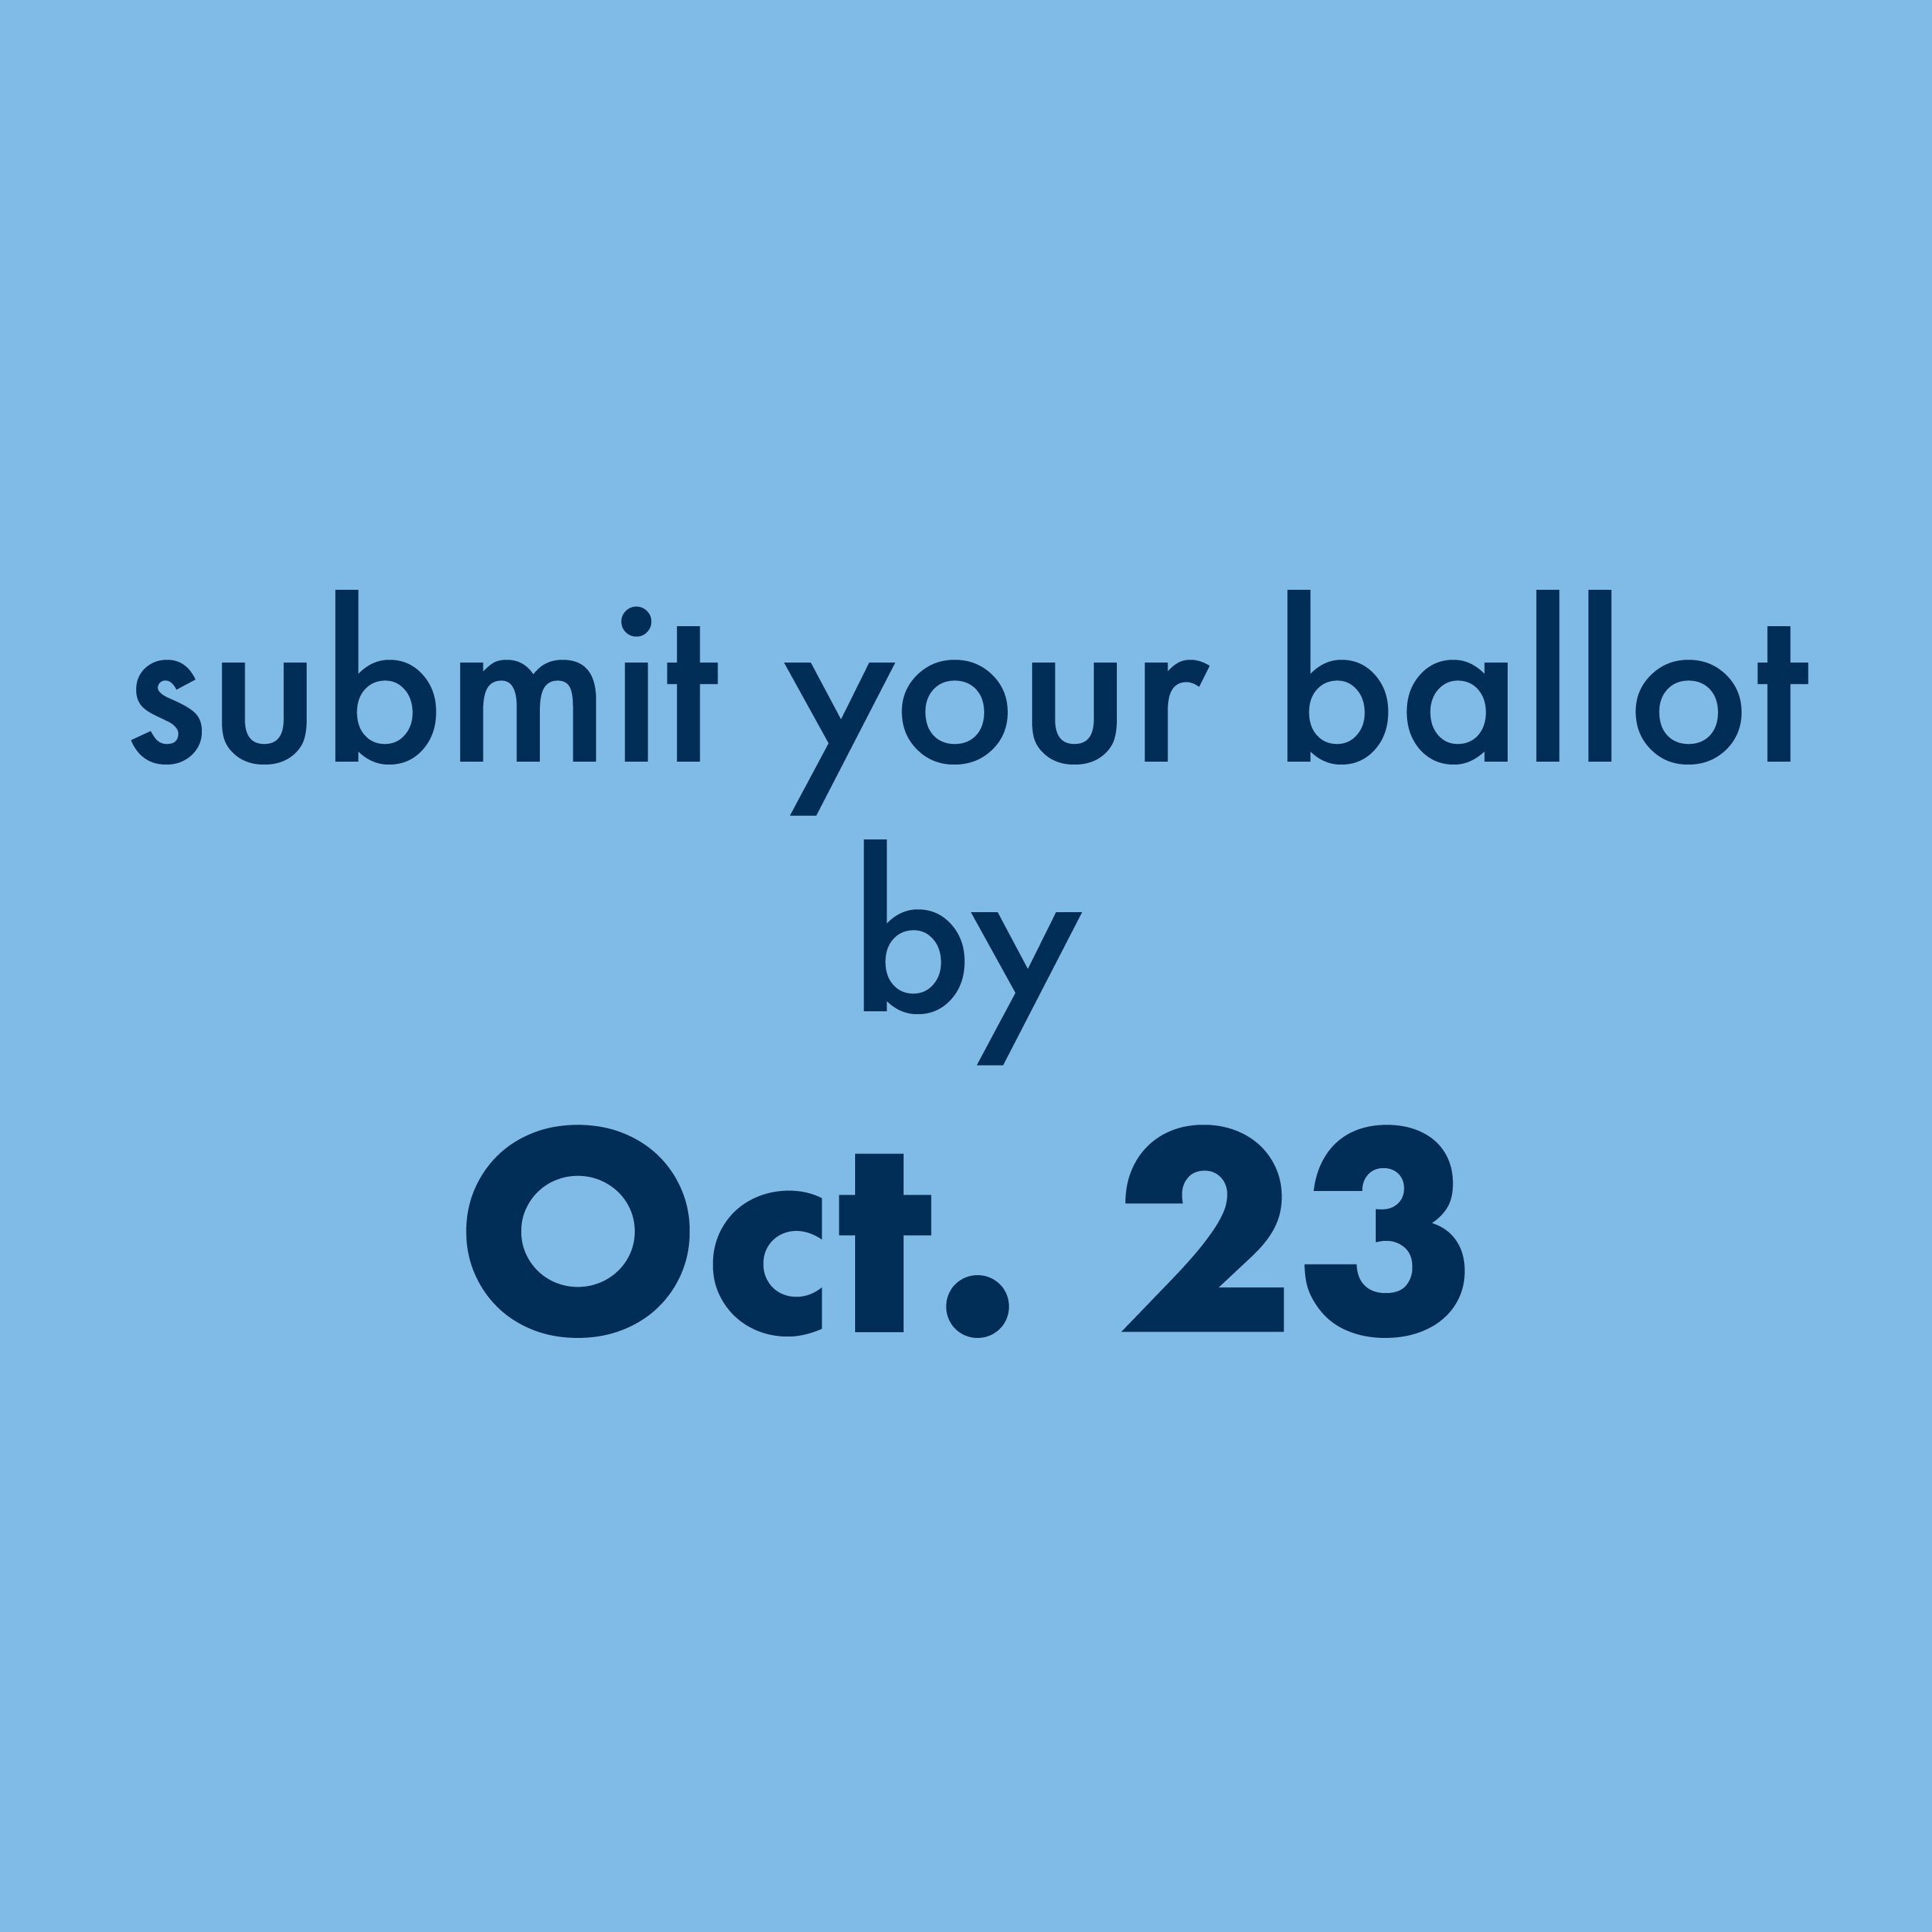 Submit your ballot by Oct. 23